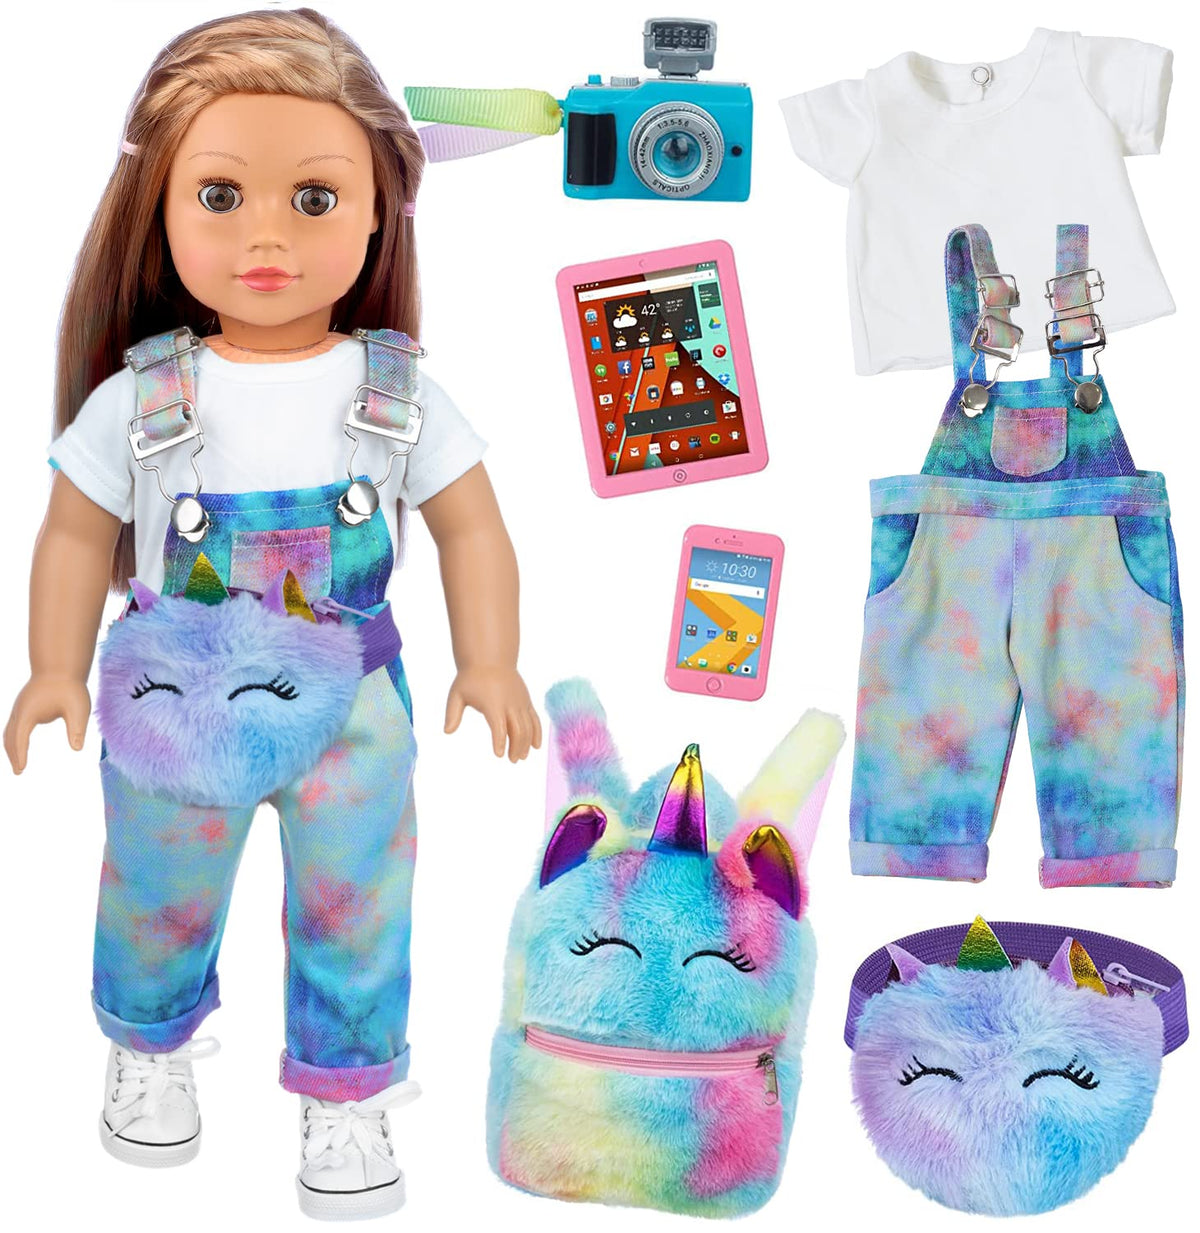 ZITA ELEMENT 7 Pcs 18 Inch Girl Doll Clothes and Accessories - 18 Inch